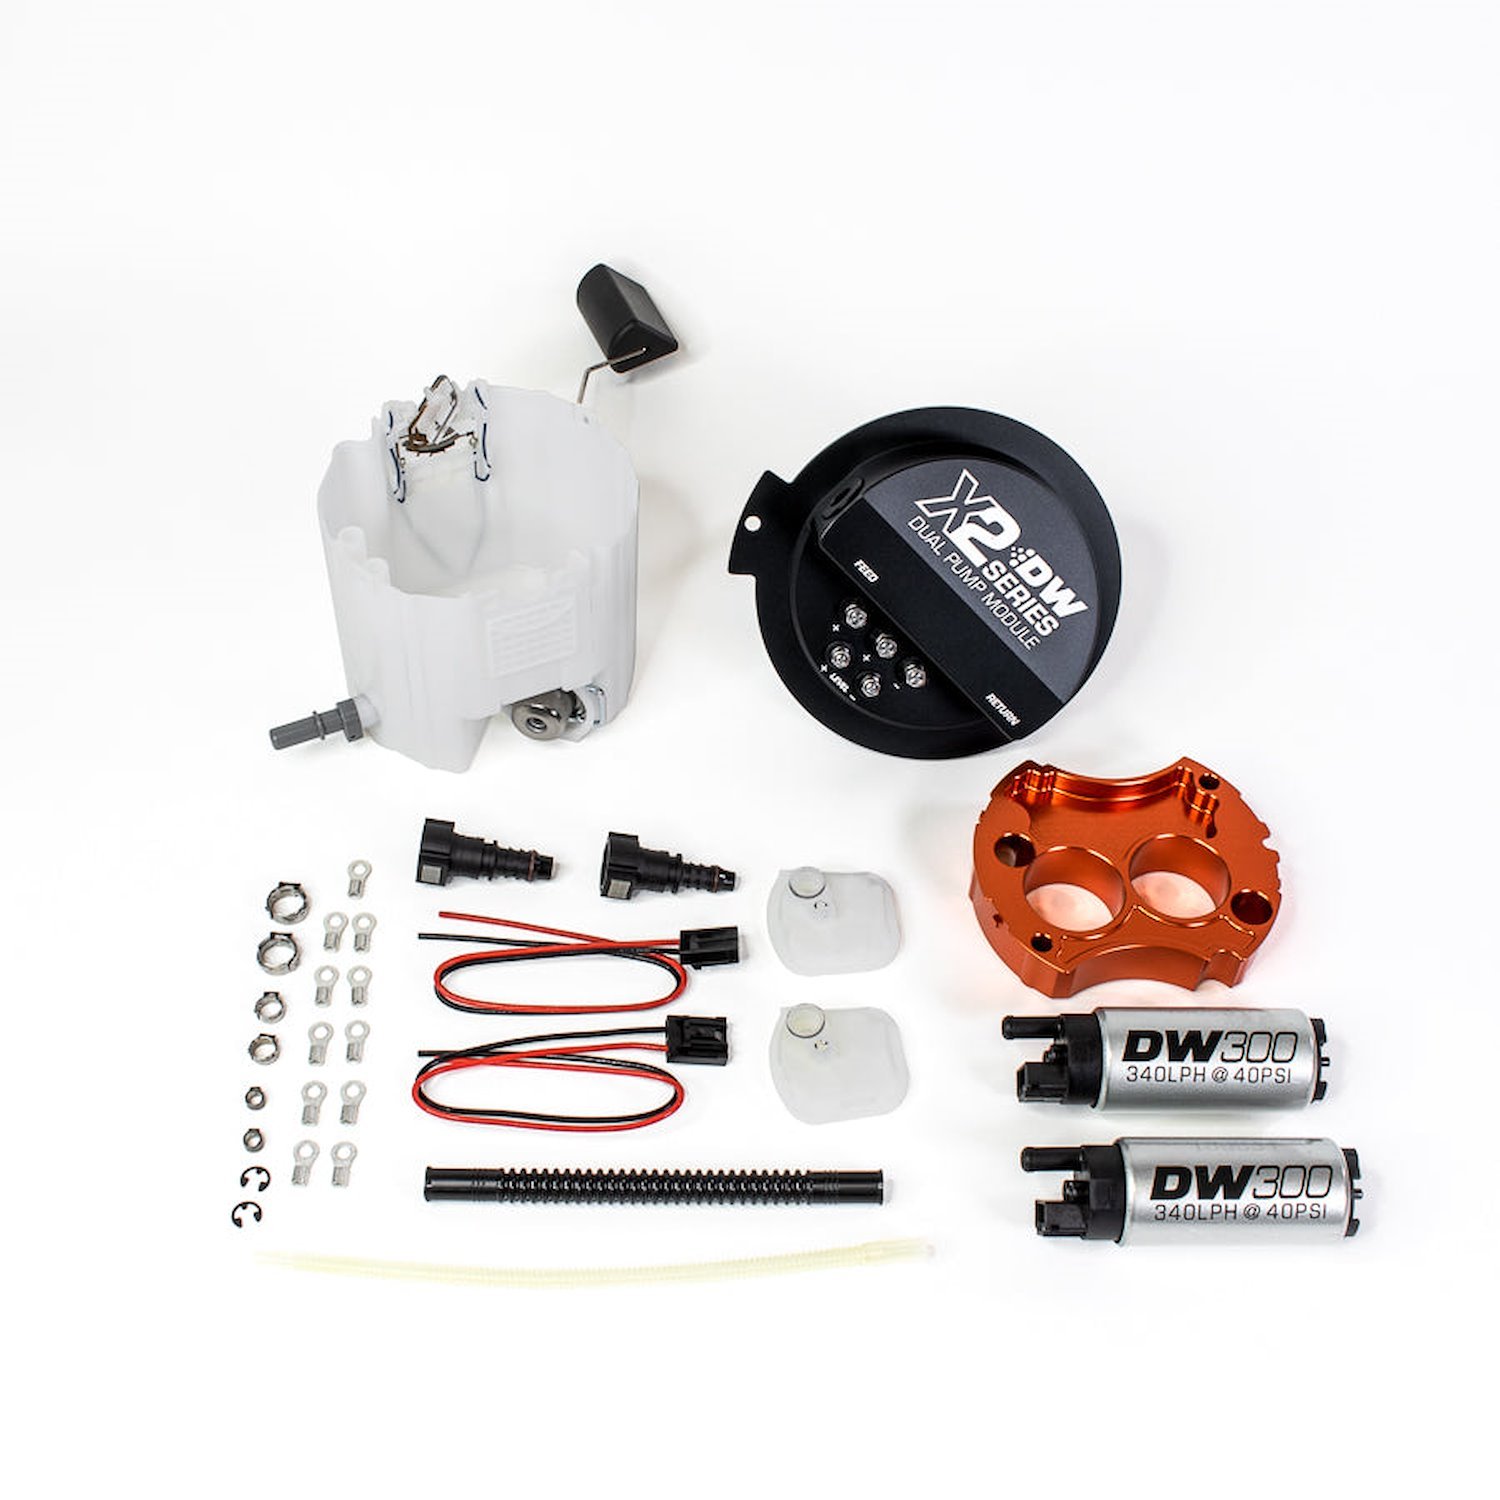 93017002 X2 Series Fuel Pump Module with 2 DW300s for 2010-15 Camaro LS 3.7 V6/SS LS3 6.2 and 2010-14 CTS-V